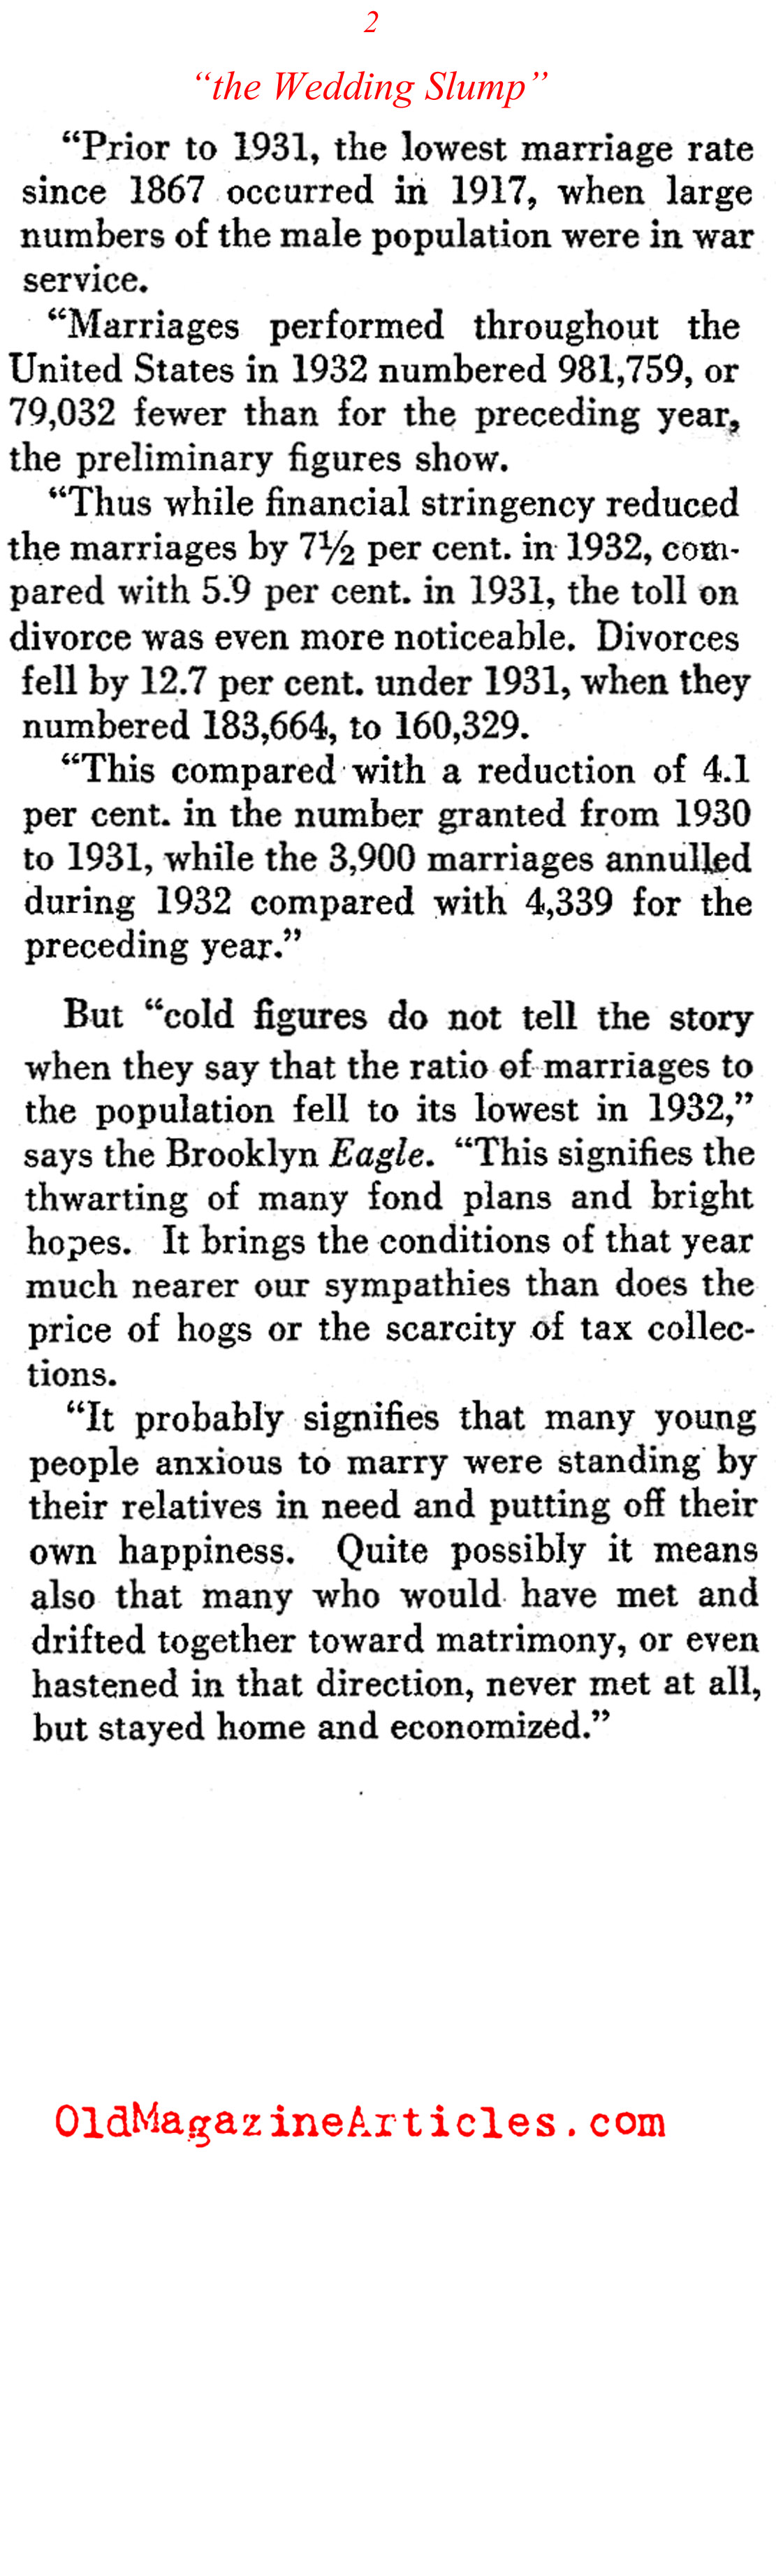 The Great Depression Reduced the Number of Marriages (The Pathfinder, 1933)